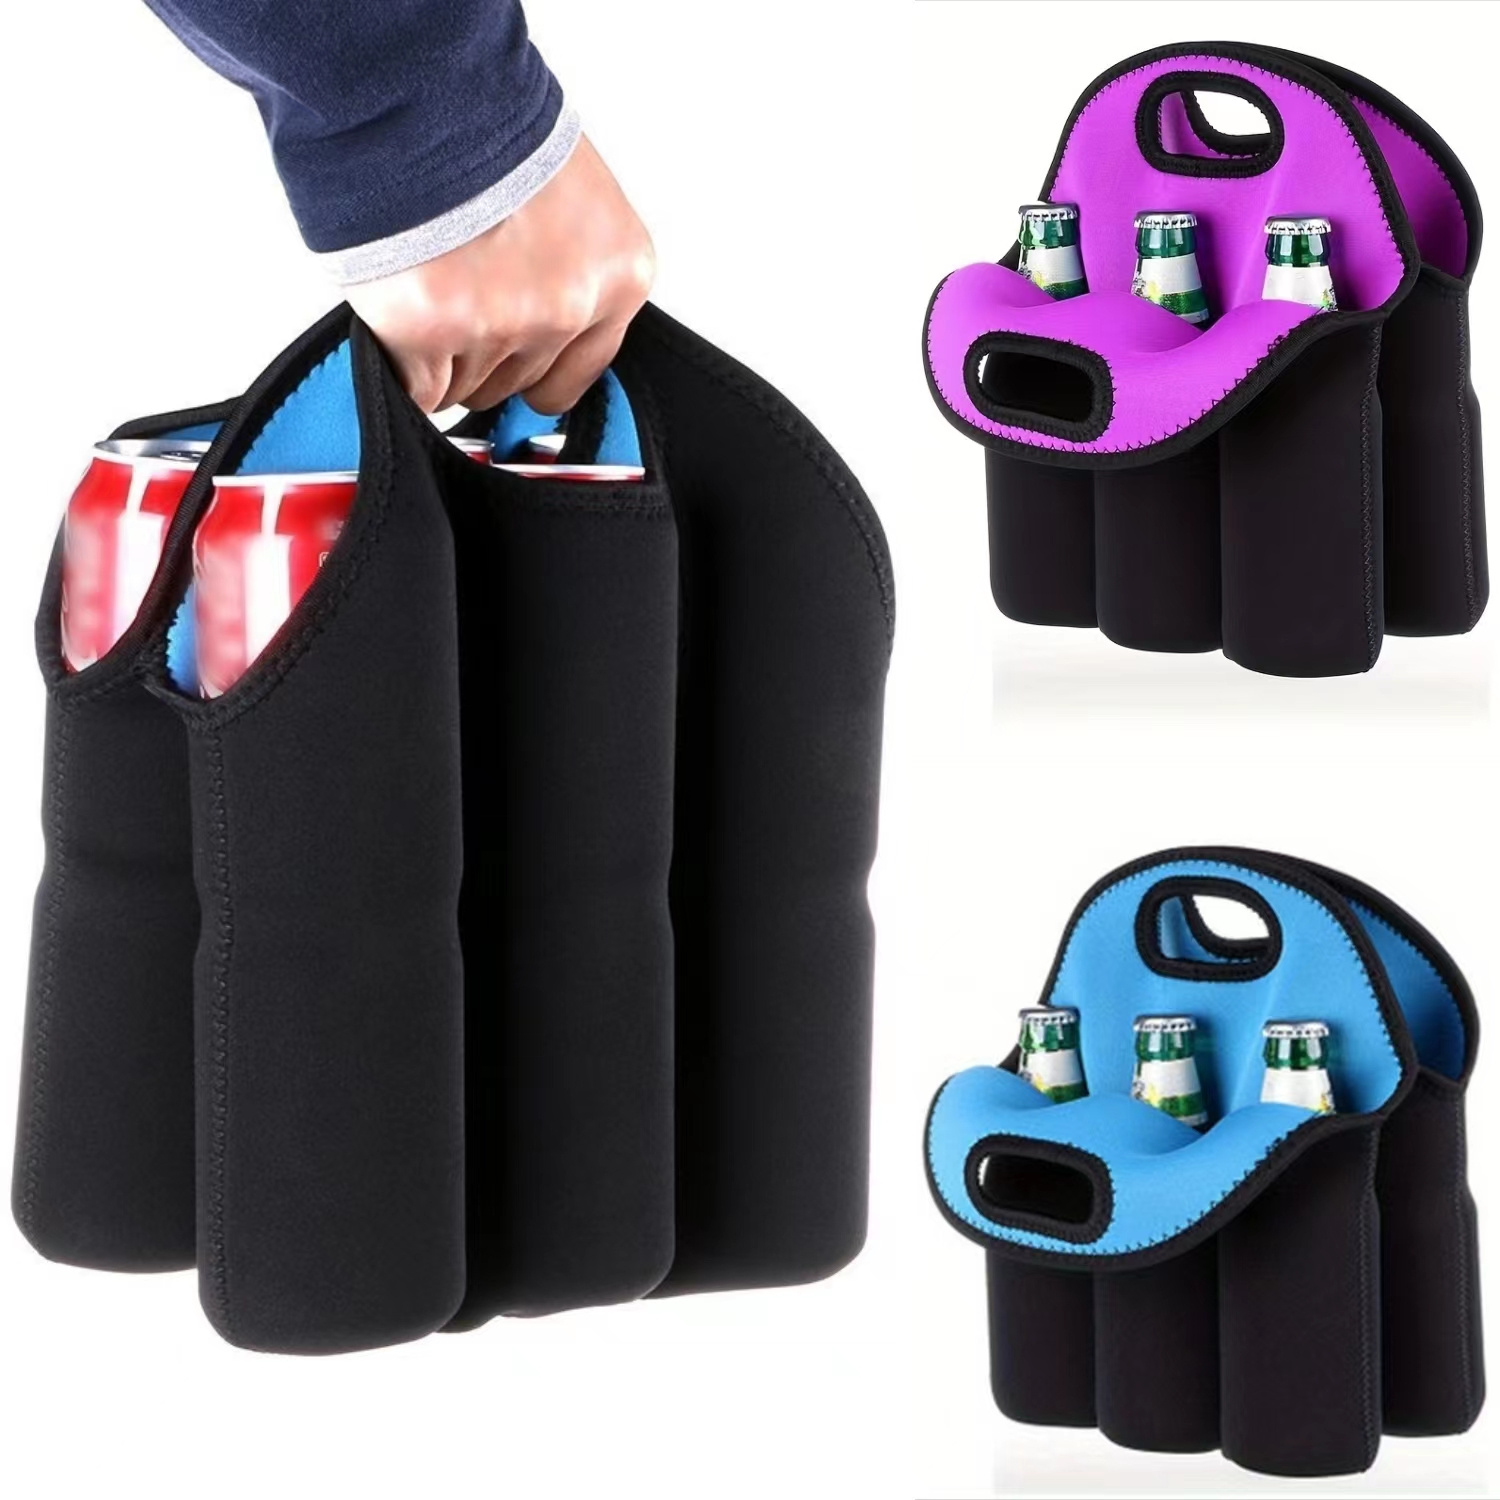 6 Bottles Insulated Neoprene Carrier Tote Carry Case Bag For Beer Baby  Bottle Cans Drinks